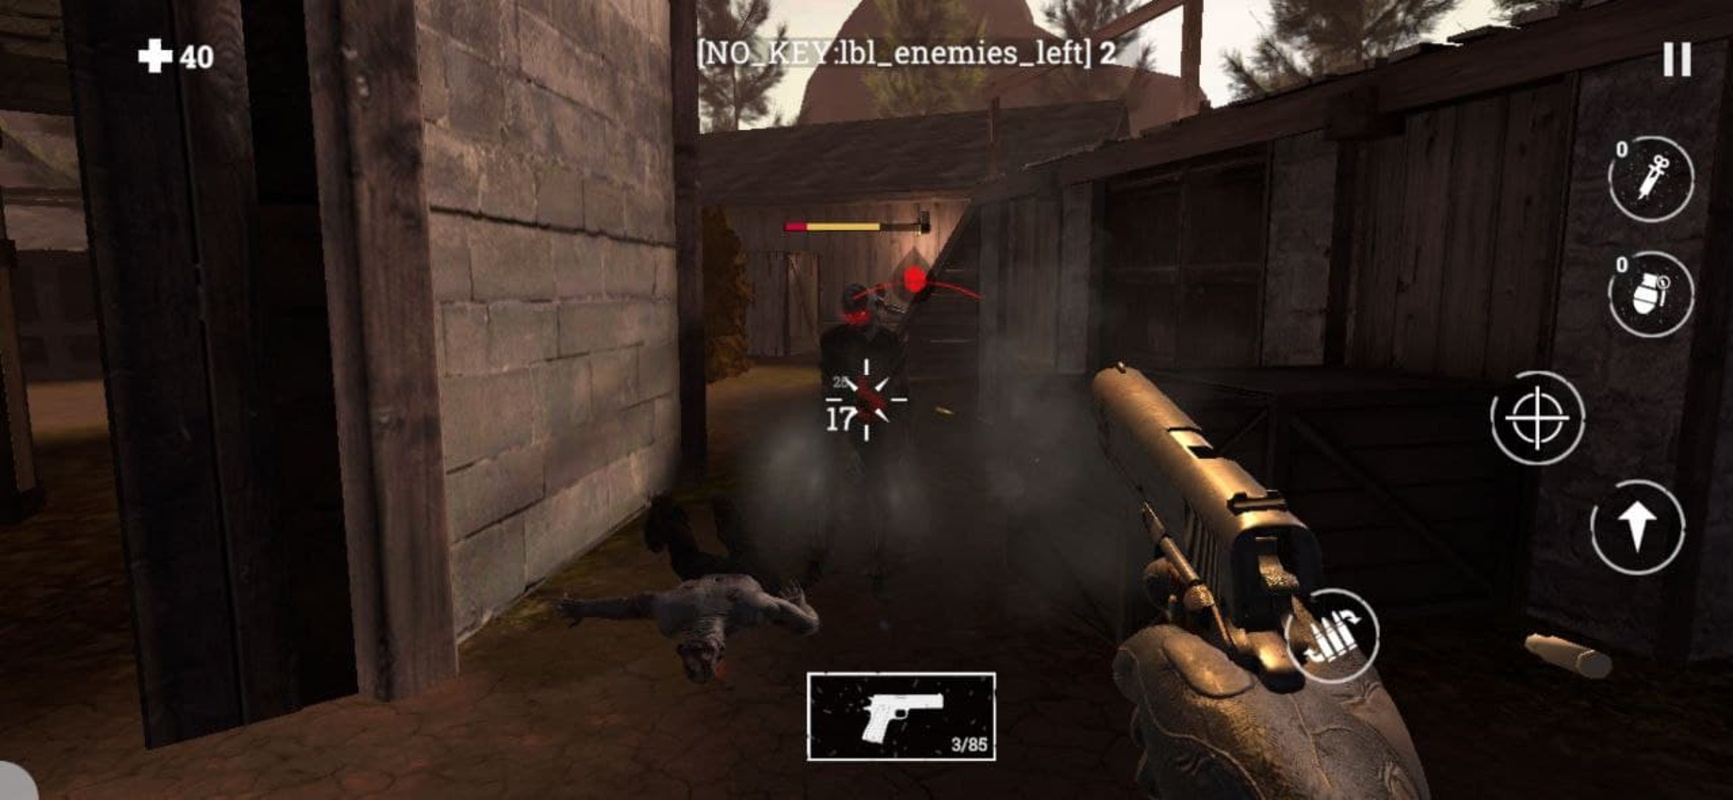 Crossfire: Survival Zombie Shooter 1.0.8 APK for Android Screenshot 6